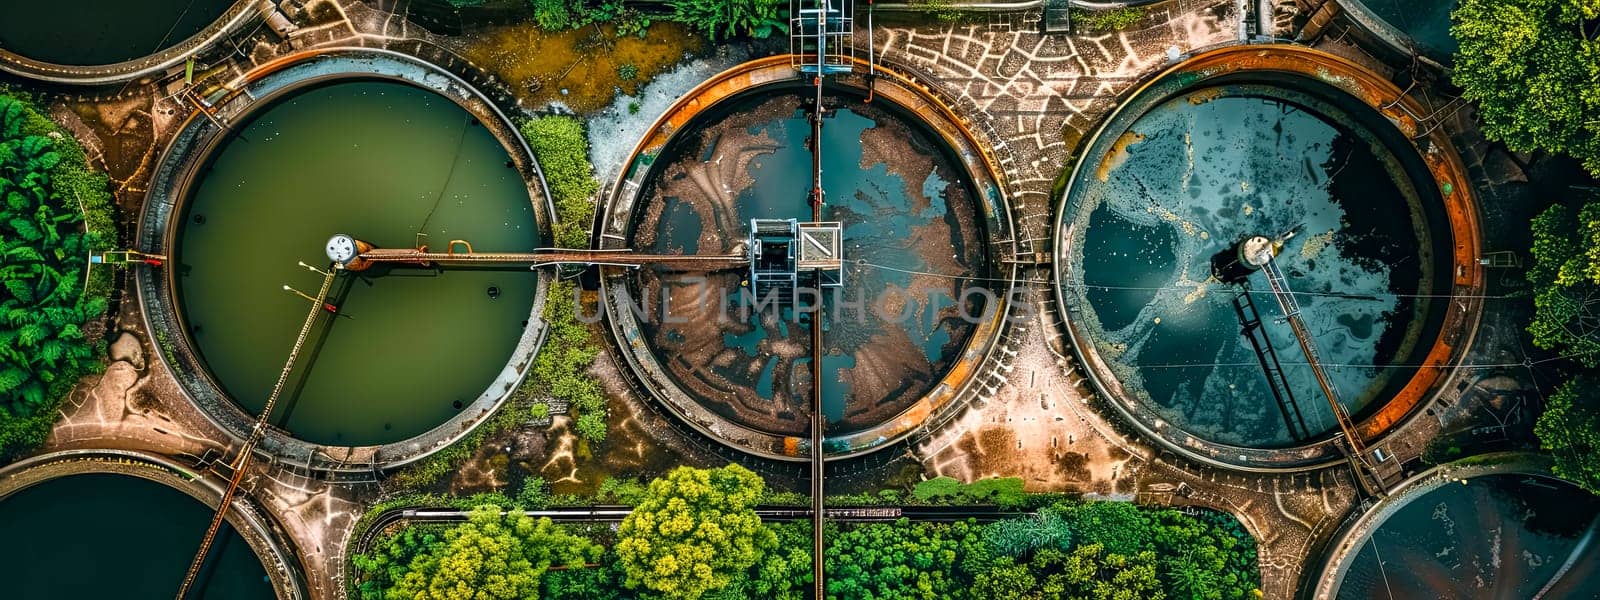 Bird's-eye view of a sewage purification system surrounded by greenery